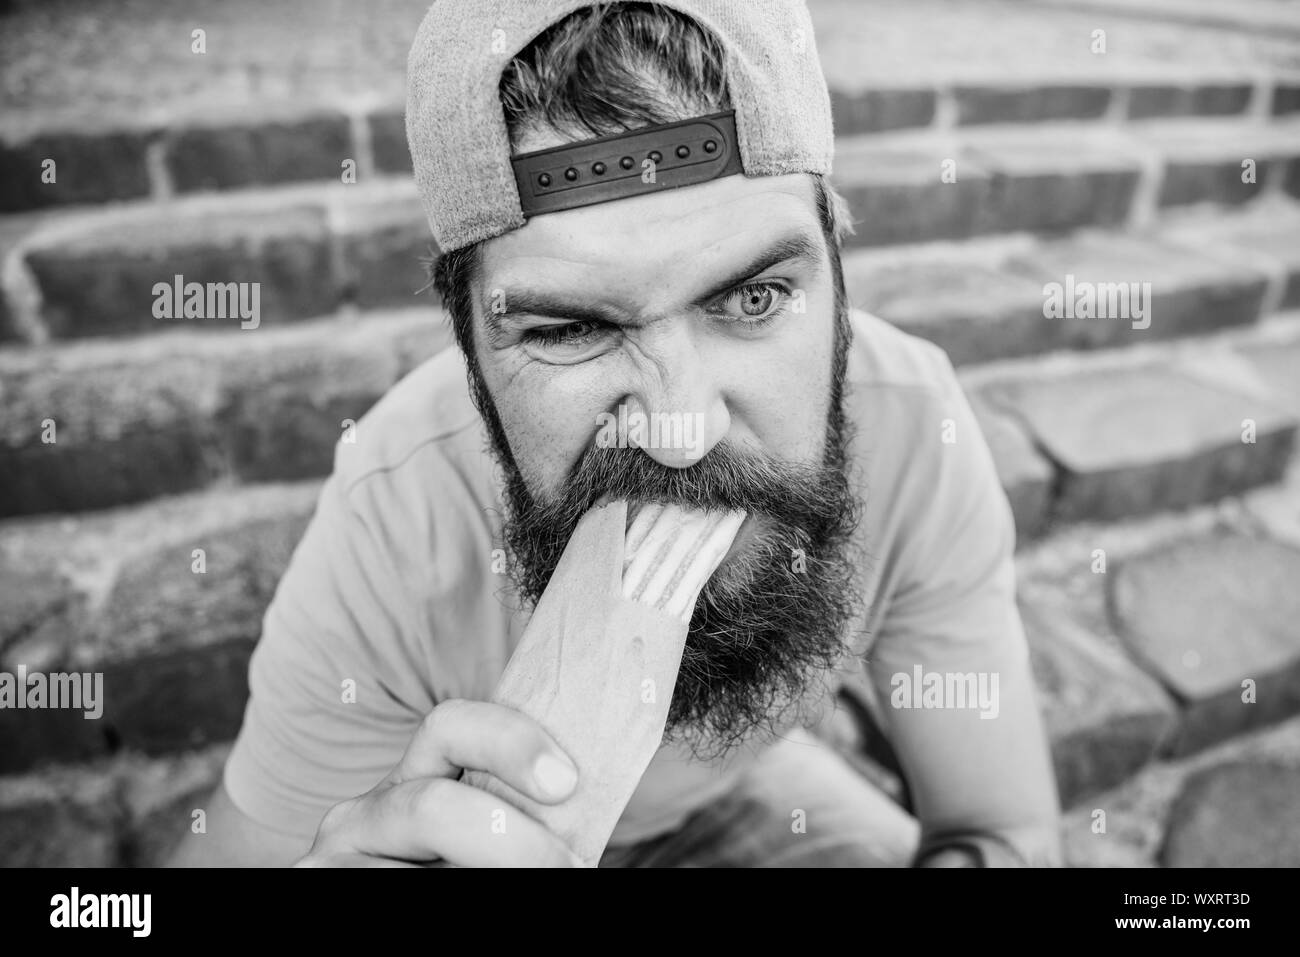 Urban lifestyle nutrition. Junk food. Carefree hipster eat junk food while sit stairs. Guy eating hot dog. Snack for good mood. Unleashed appetite. Street food concept. Man bearded eat tasty sausage. Stock Photo